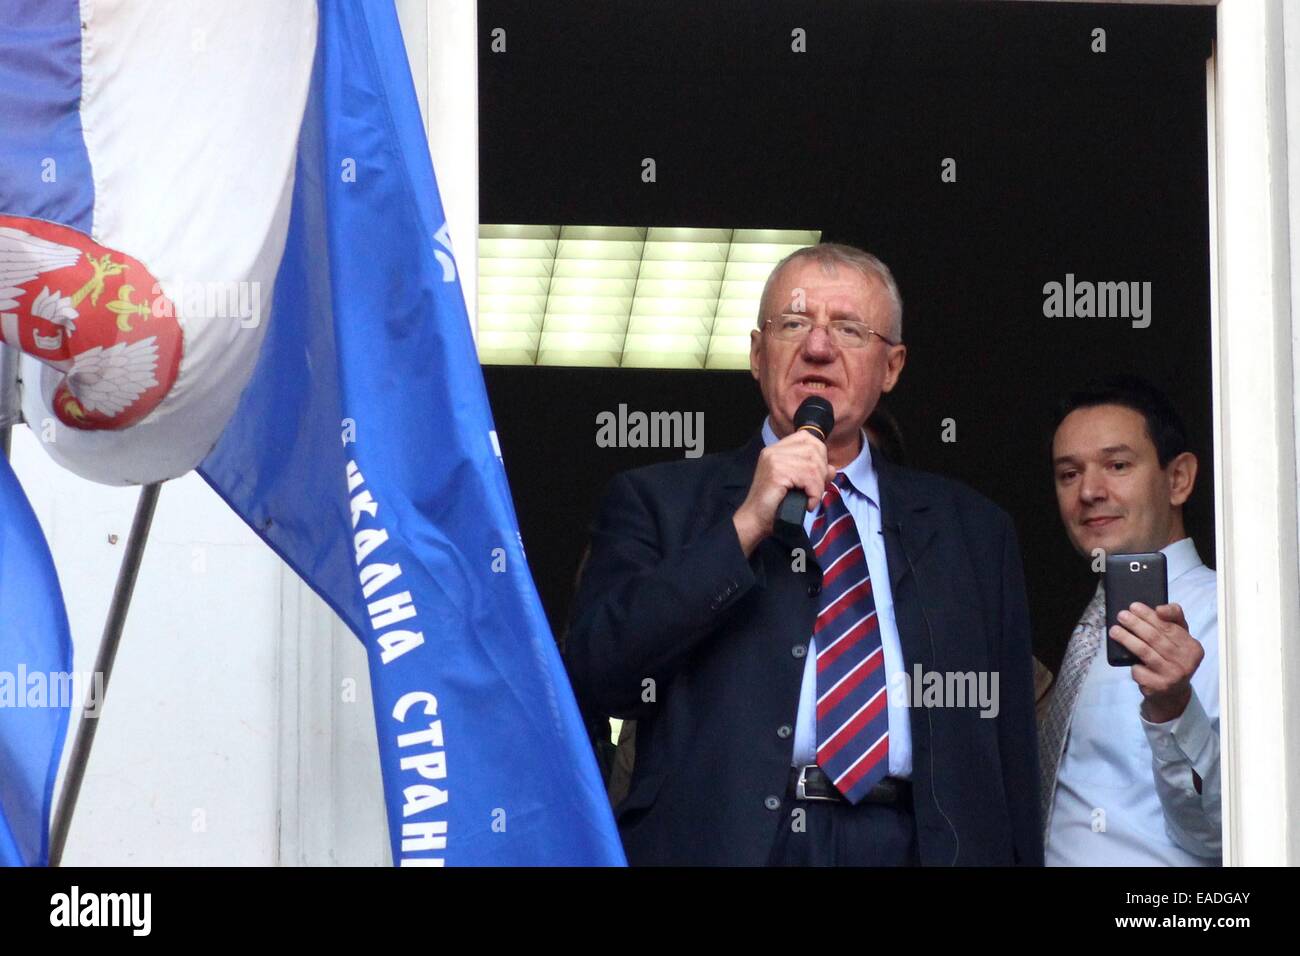 Belgrade. 12th Nov, 2014. Vojislav Seselj (L), former leader of the Serbian Radical Party, addresses his supporters at his party headquarters in Belgrade, Serbia, on Nov. 12. Vojislav Seselj who was indicted for war crimes was provisionally released due to health reasons on Wednesday. Credit:  Nemanja Cabric/Xinhua/Alamy Live News Stock Photo